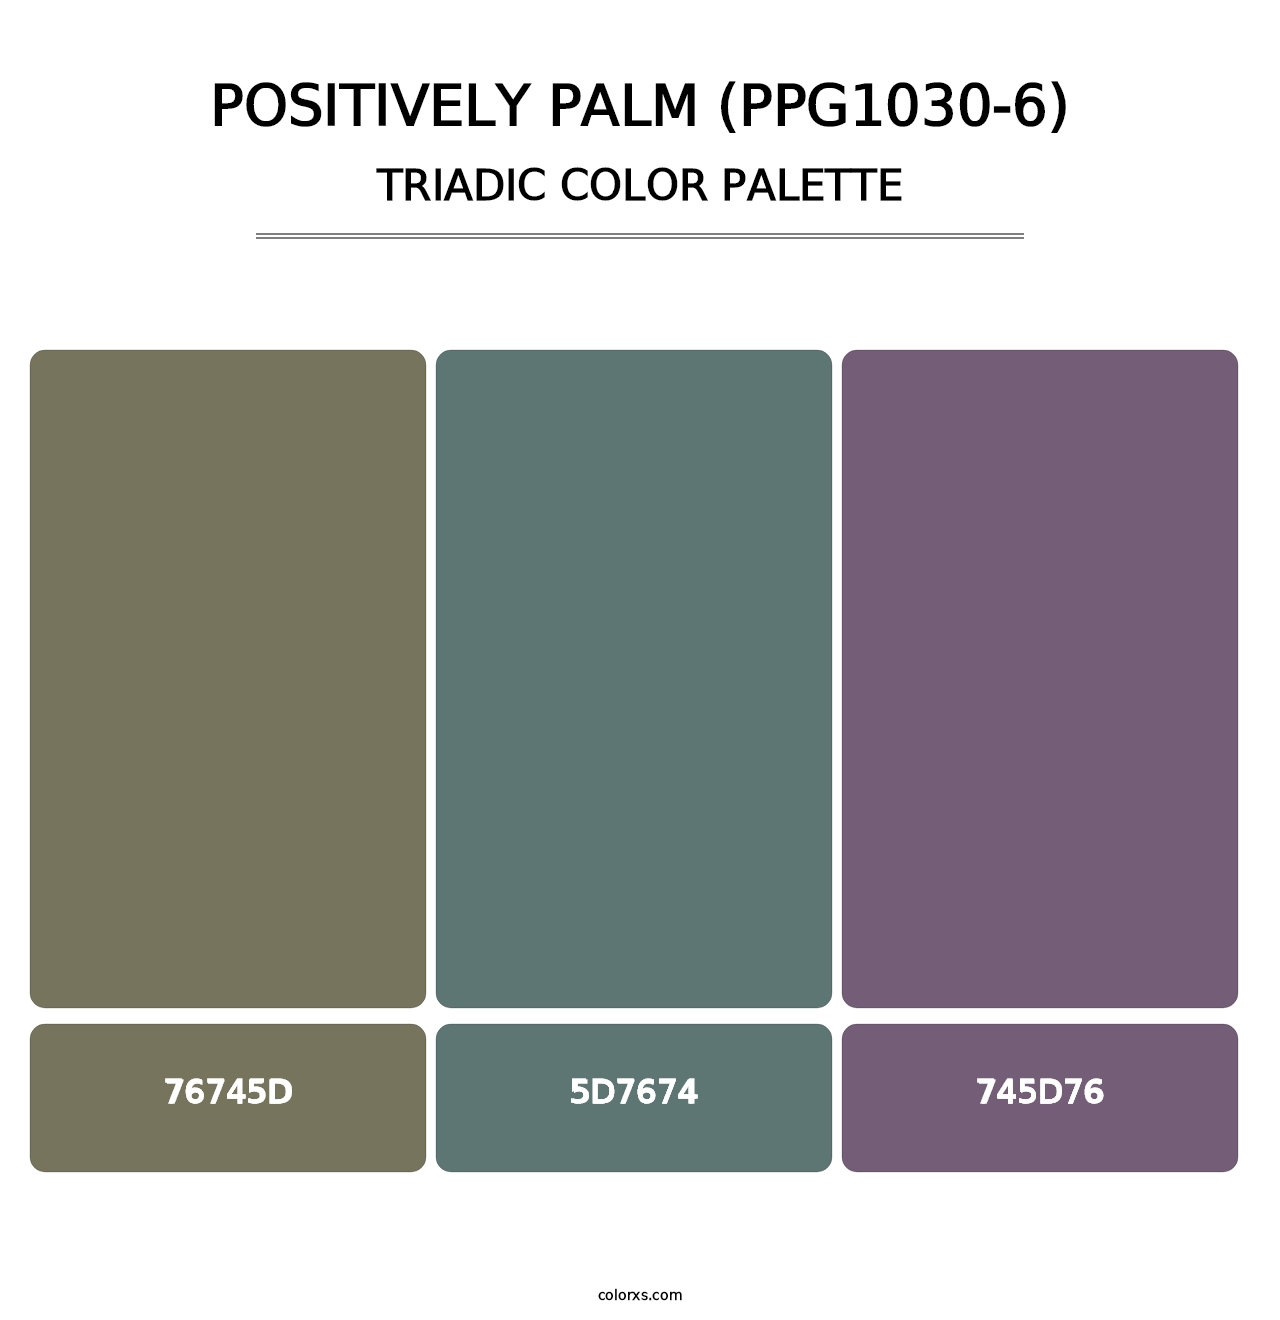 Positively Palm (PPG1030-6) - Triadic Color Palette